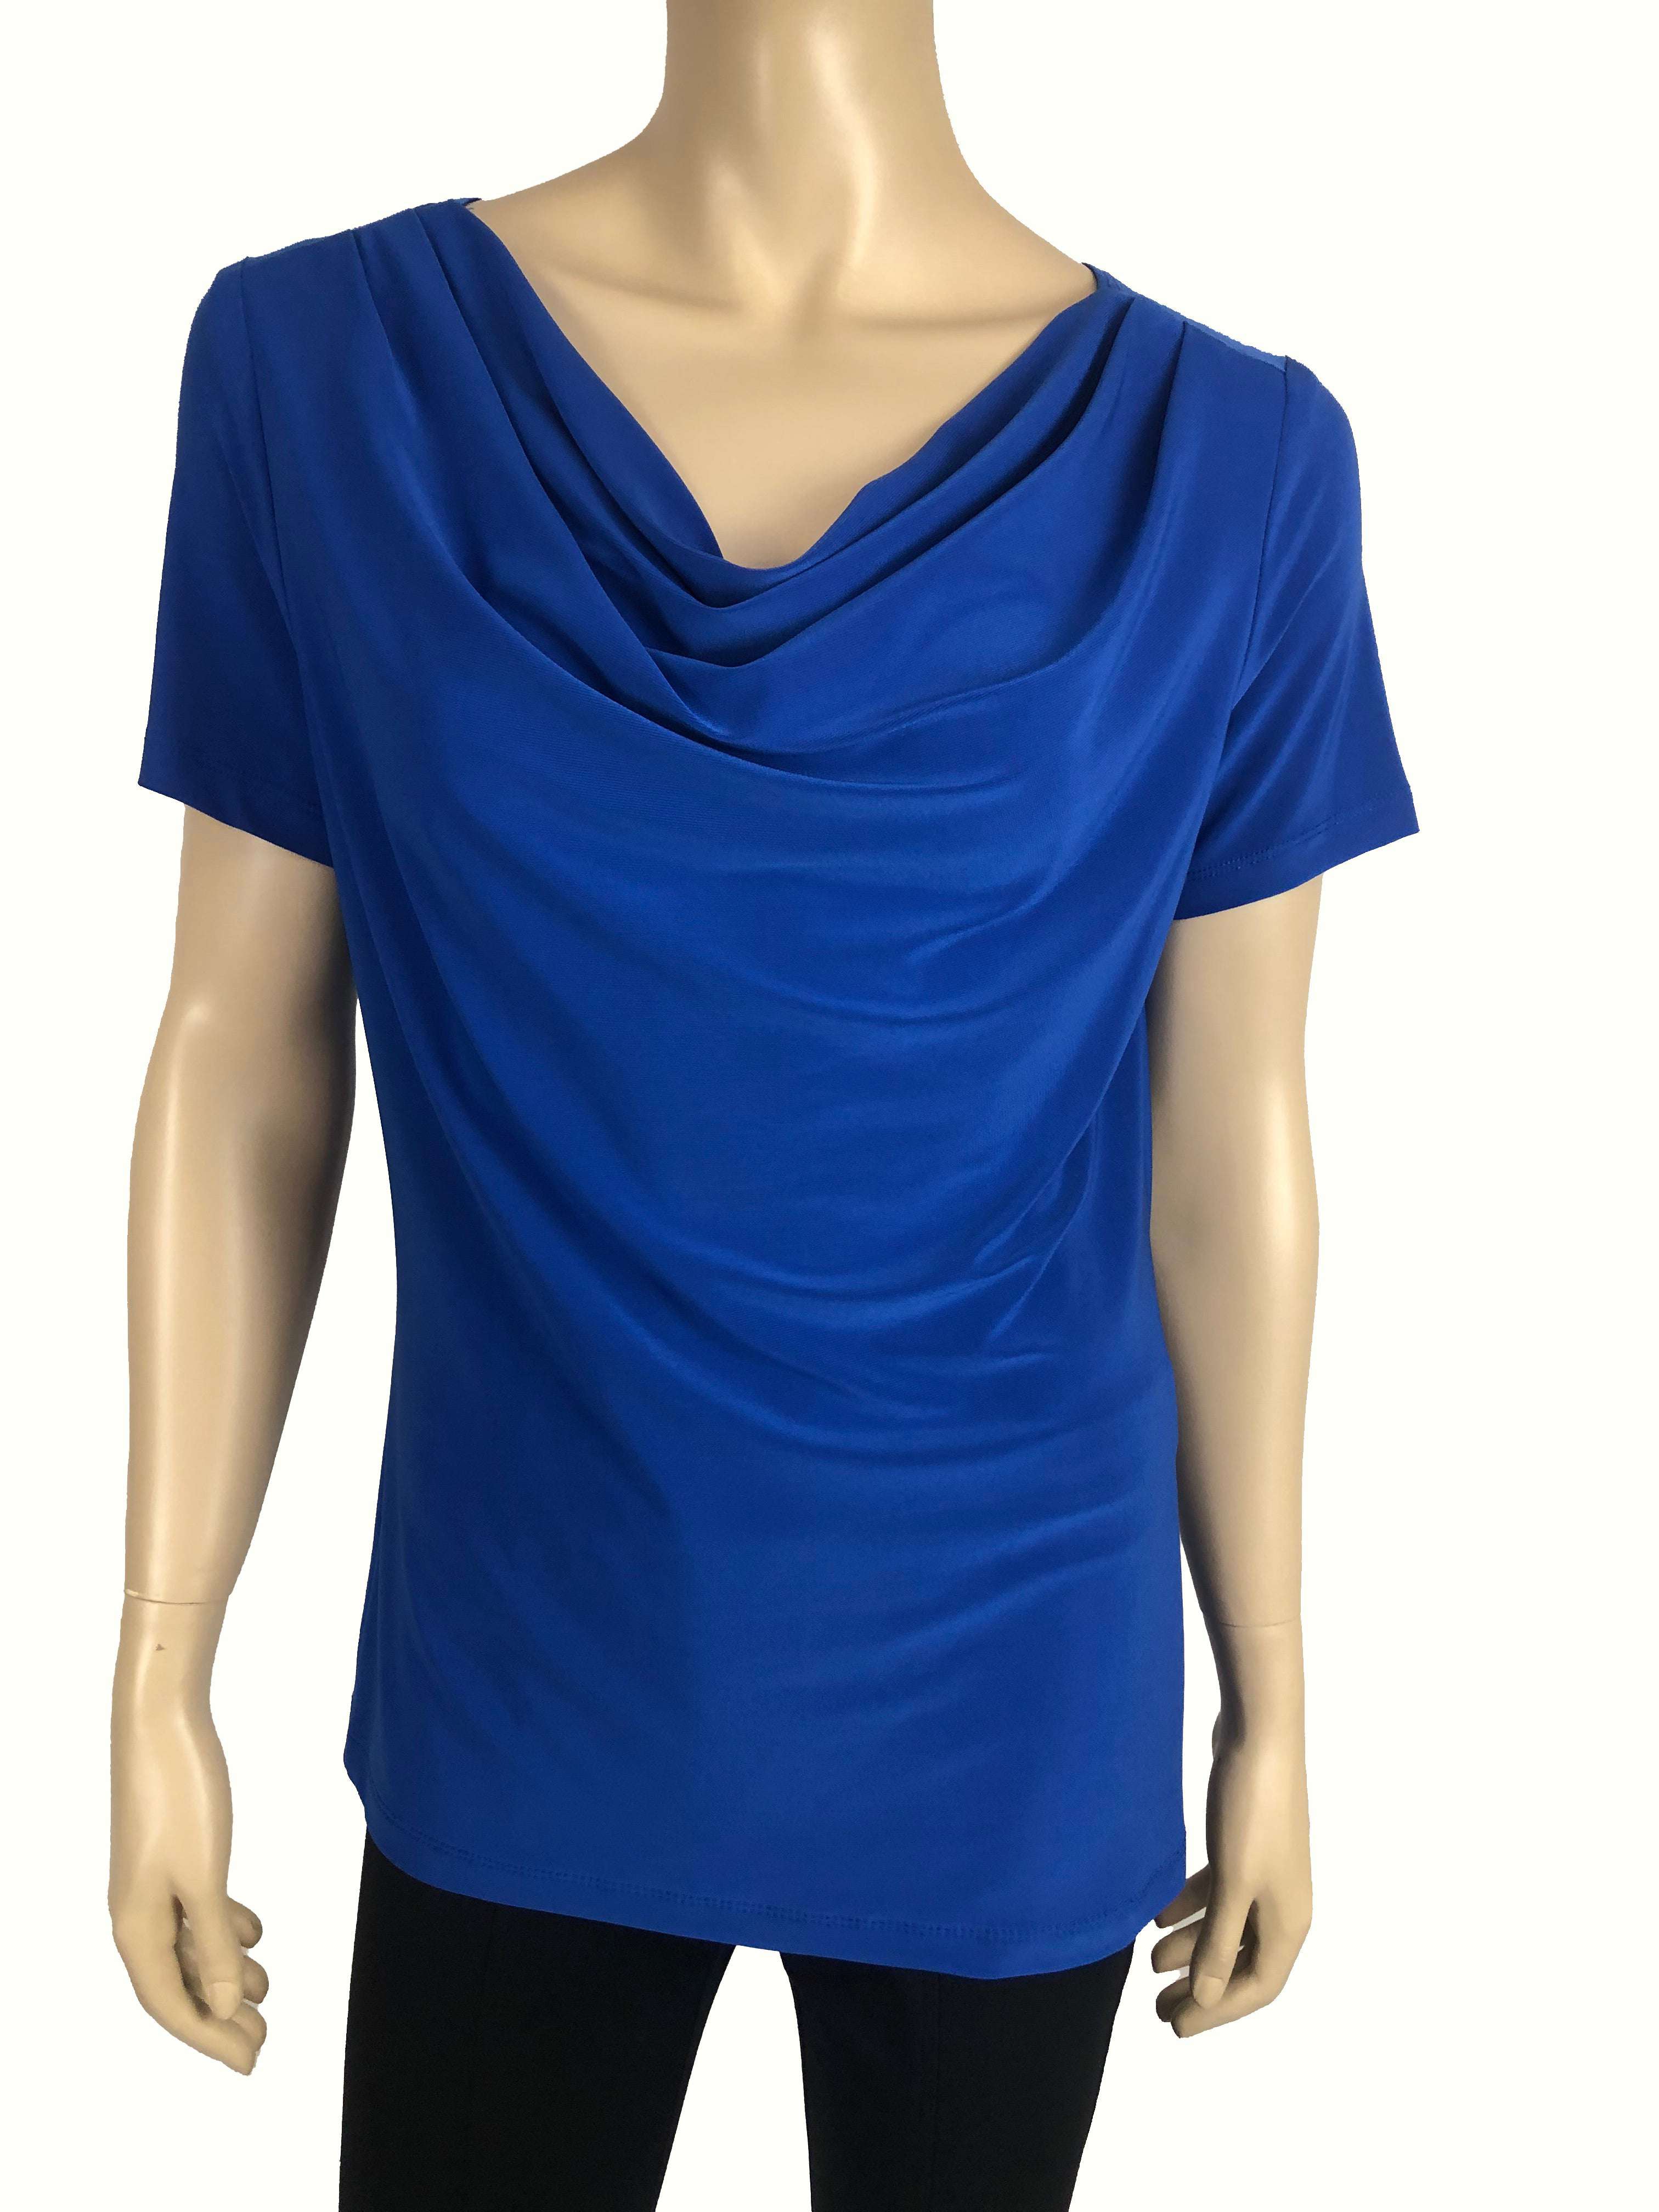 Women's Royal Blue Top on Sale 50% off Royal Blue Draped Neck Top Made in Canada - Yvonne Marie - Yvonne Marie